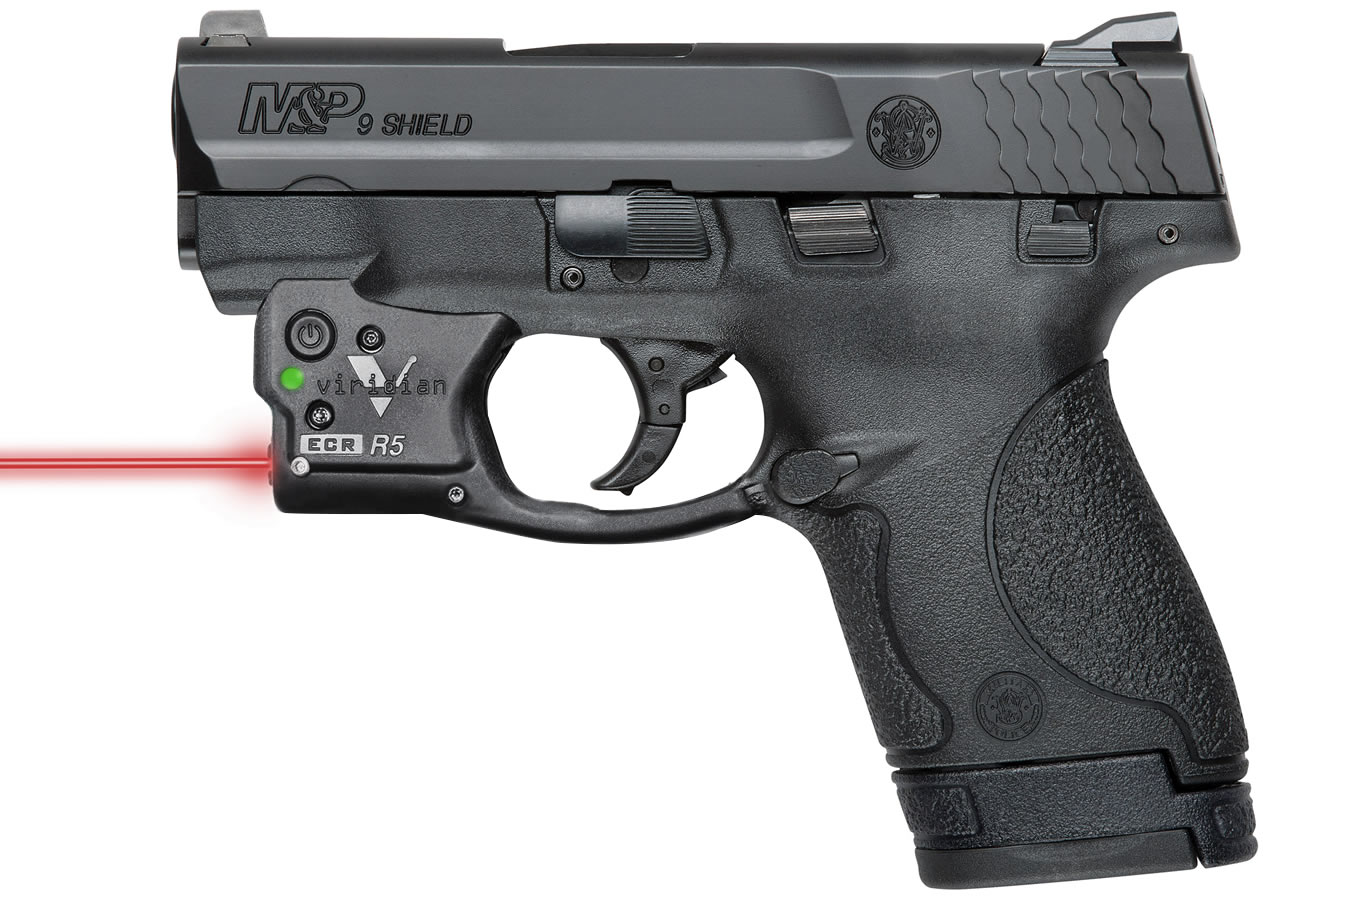 Smith Wesson M P9 Shield 9mm Centerfire Pistol With Thumb Safety And 